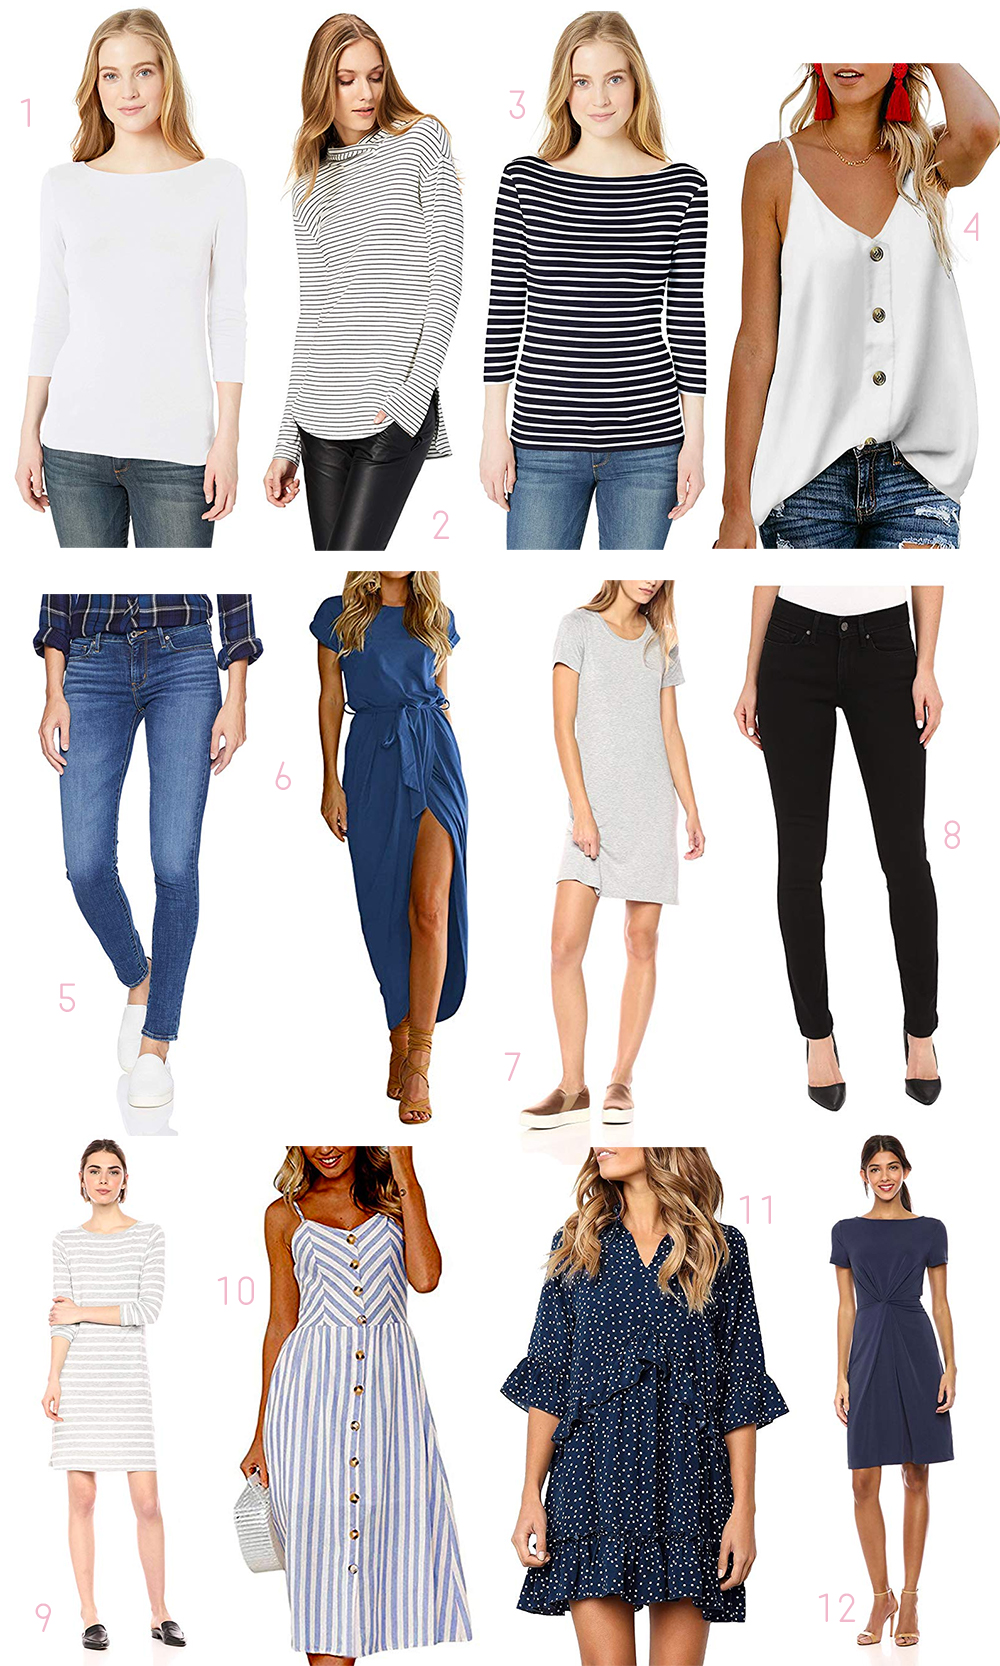 top prime day women's fashion deals, best prime day 2019 womens fashion deals, best prime day 2019 fashion deals, Best Prime Day 2019 Deals by popular affordable fashion blogger Stephanie Ziajka from Diary of a Debutante